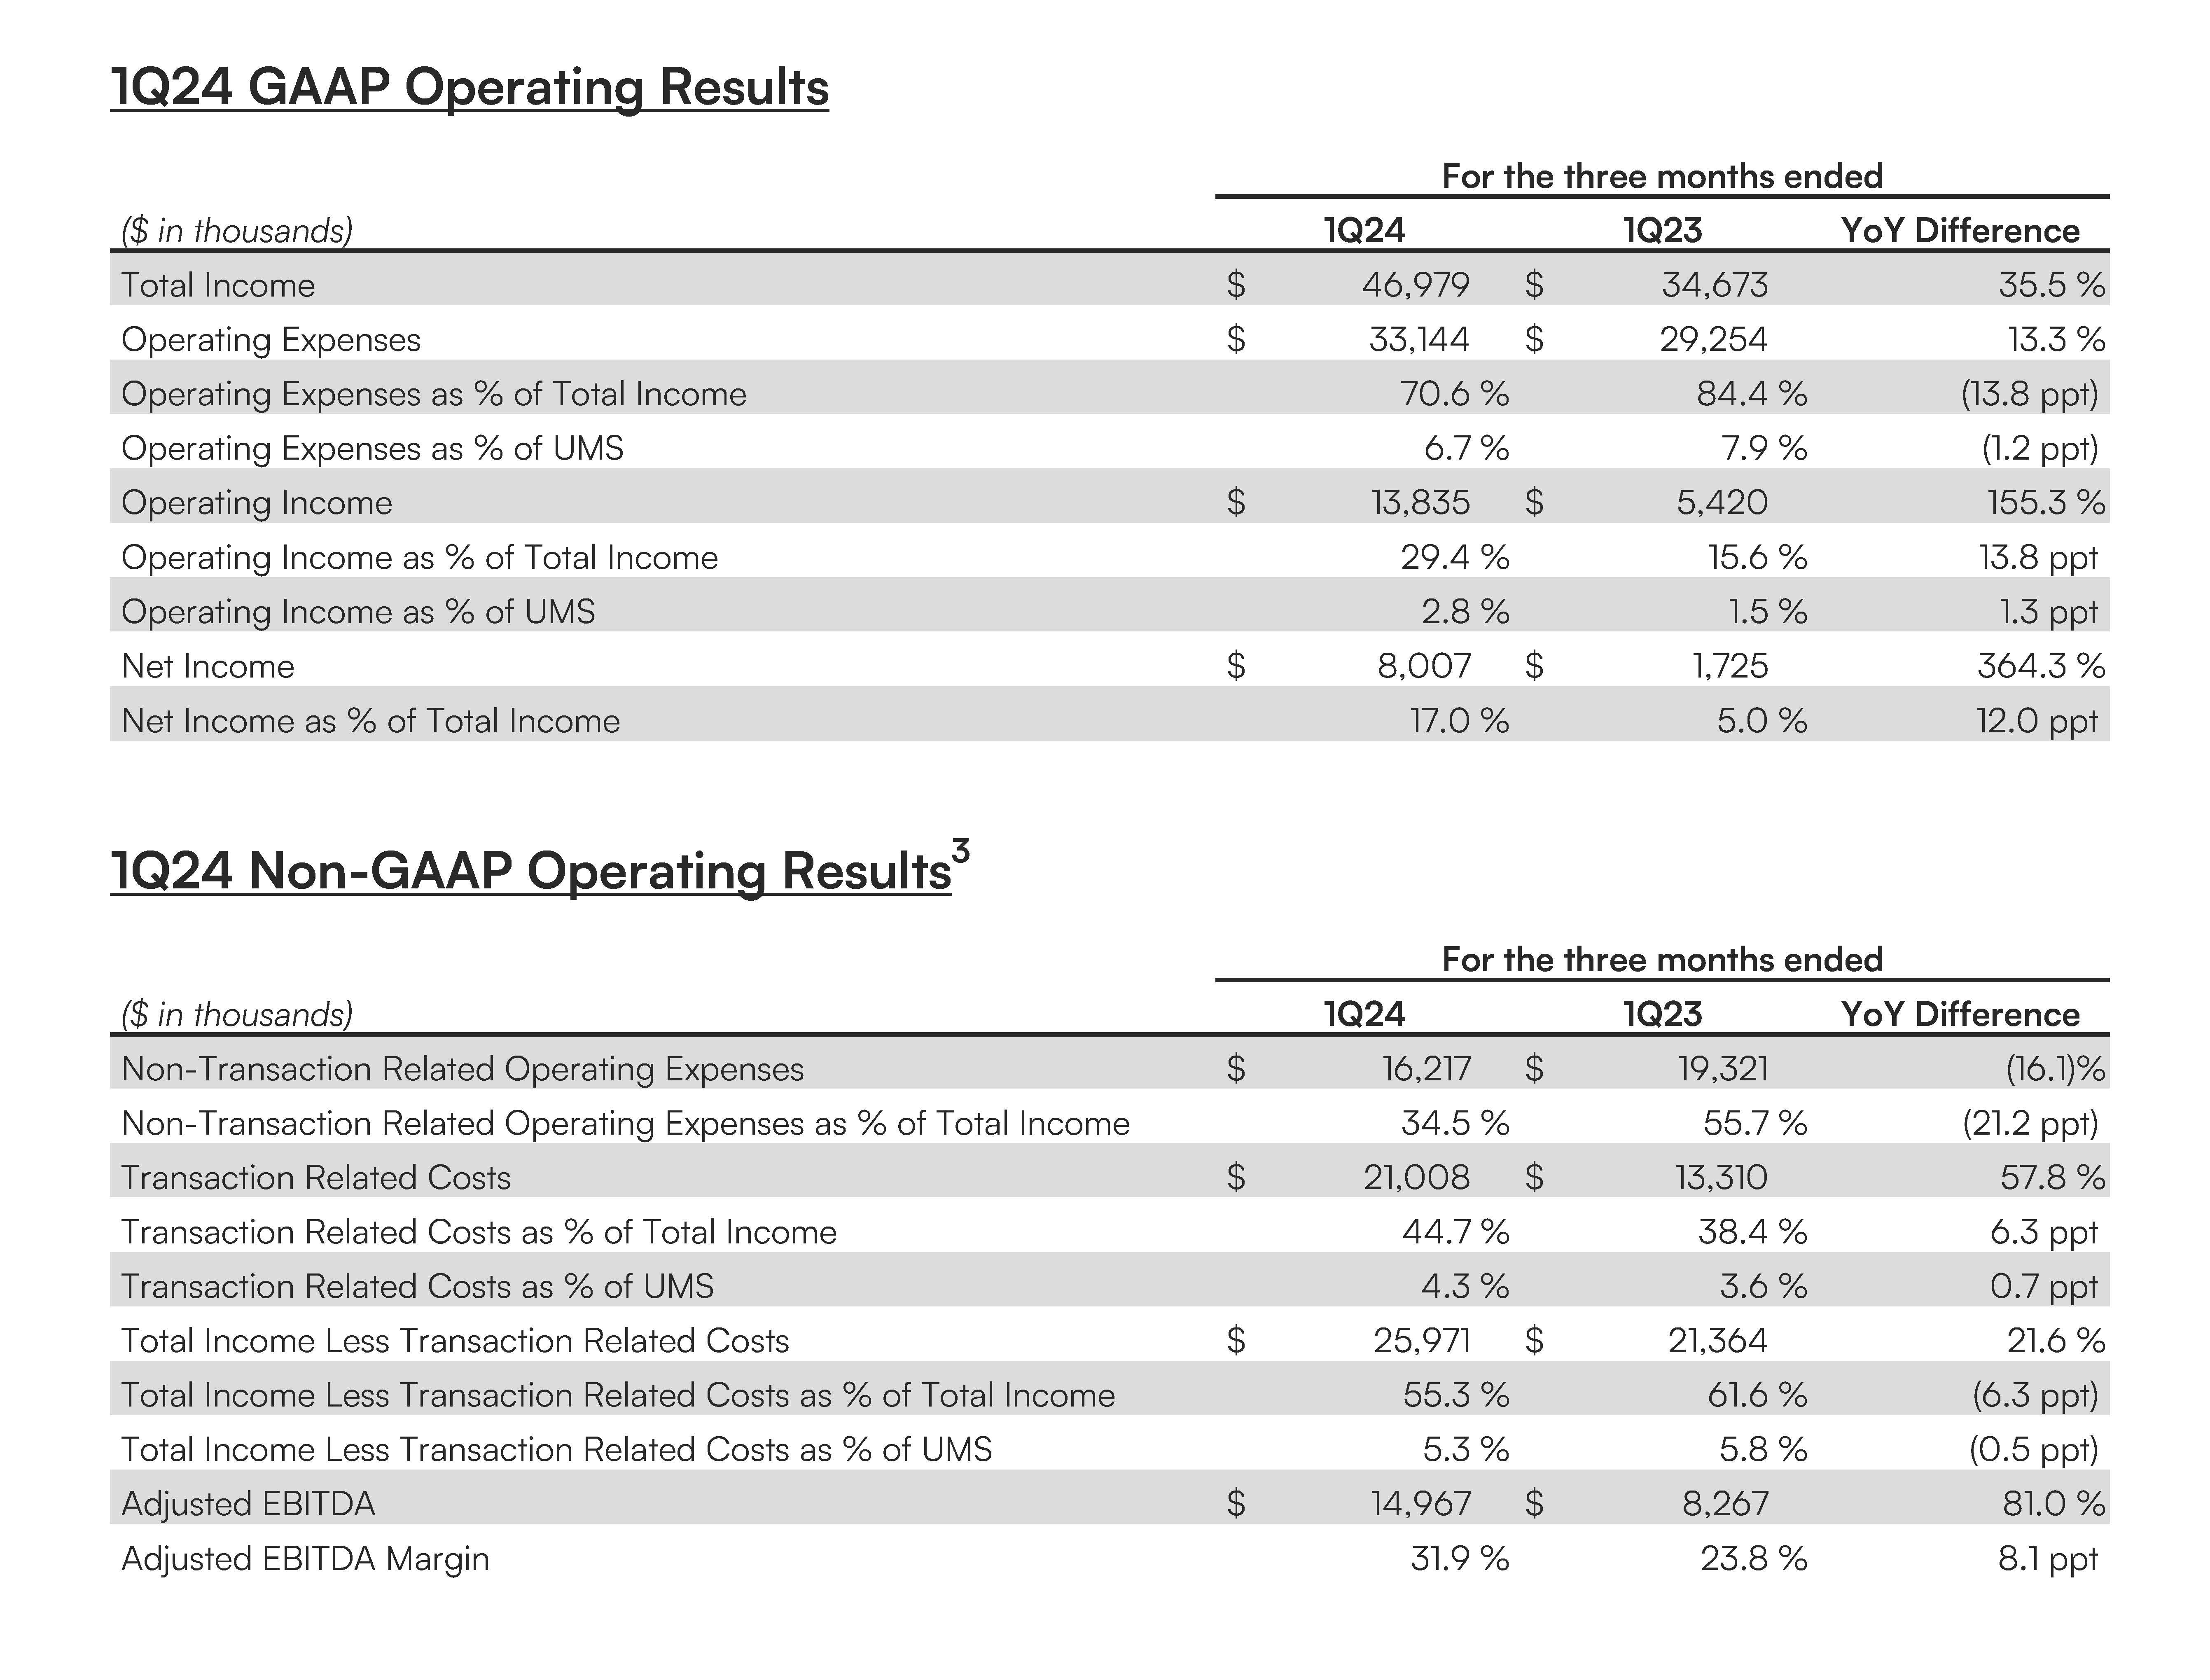 1Q24 GAAP Operating Results and 1Q24 Non-GAAP Operating Results 